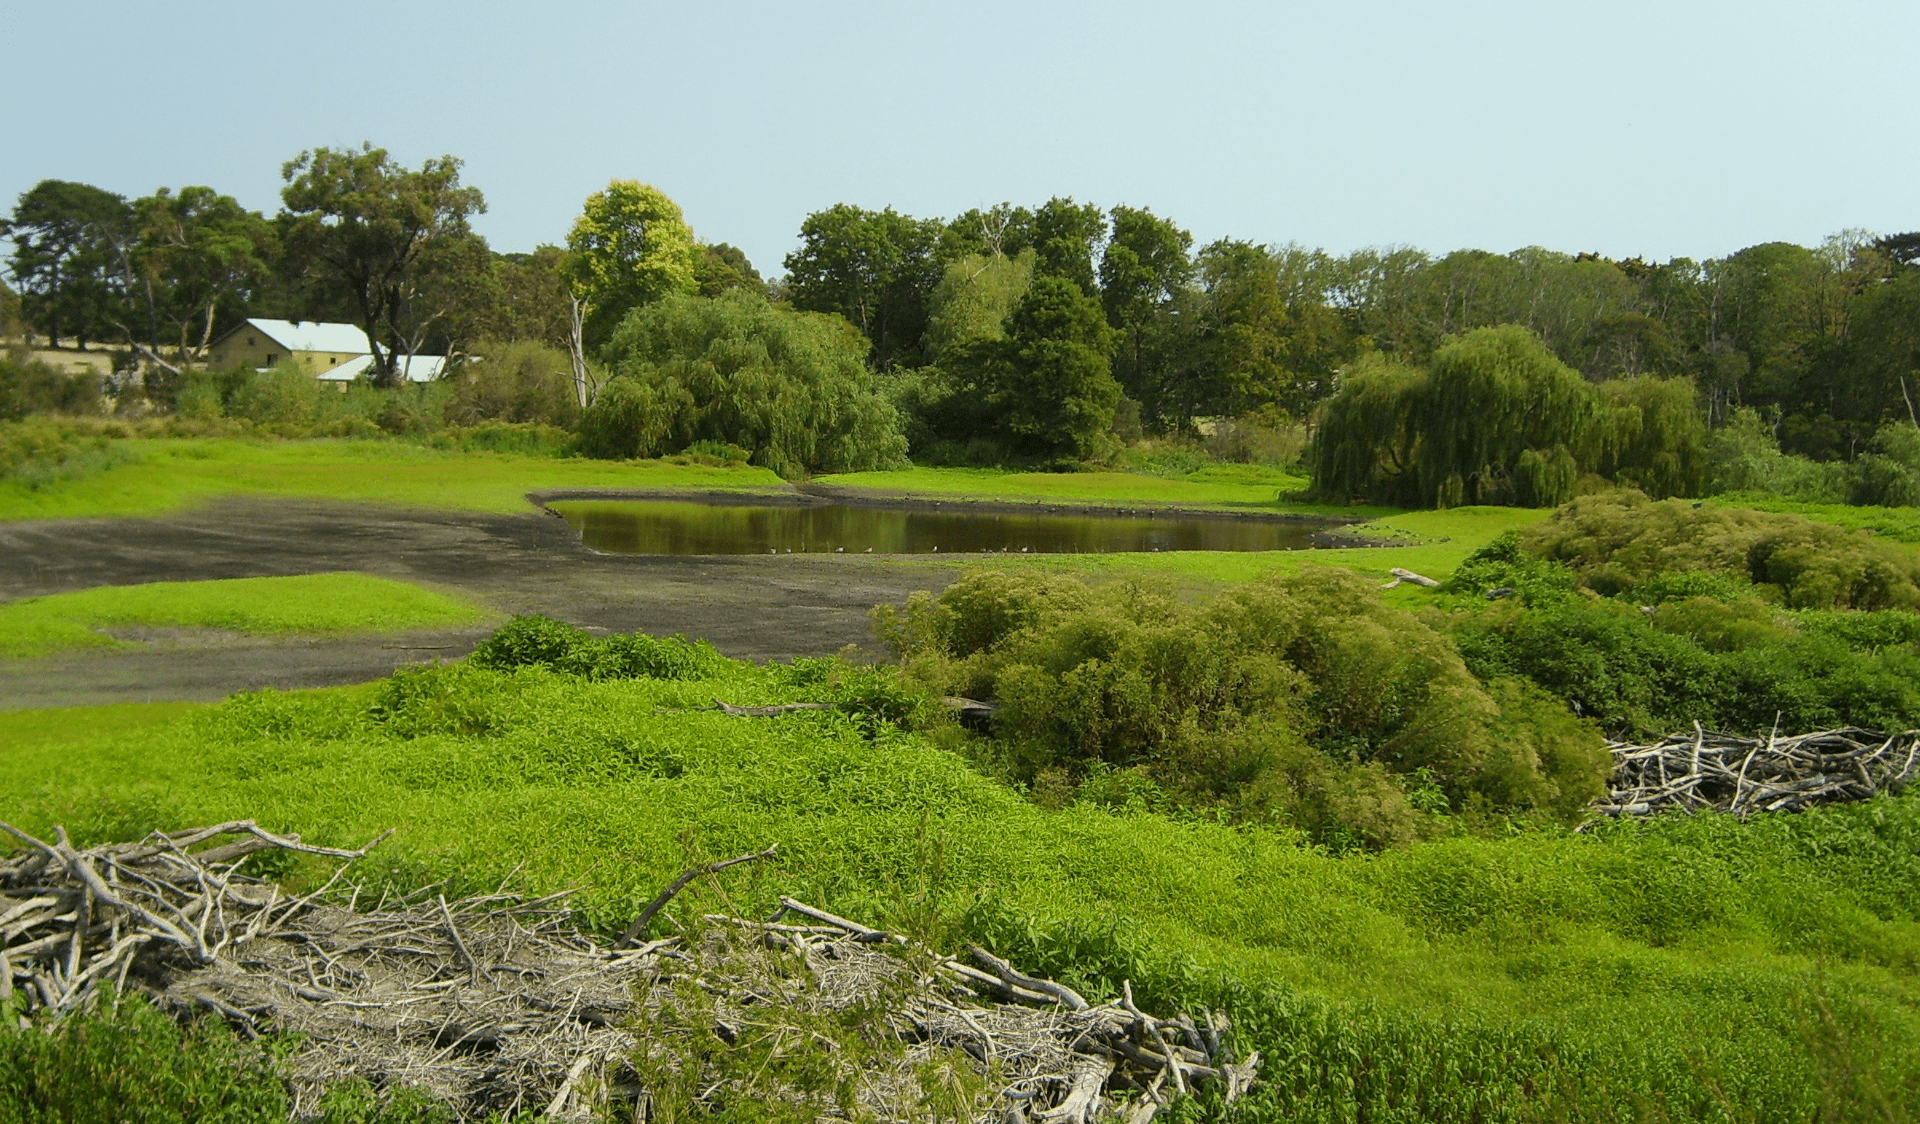 The wetlands at Coolart Heritage Area